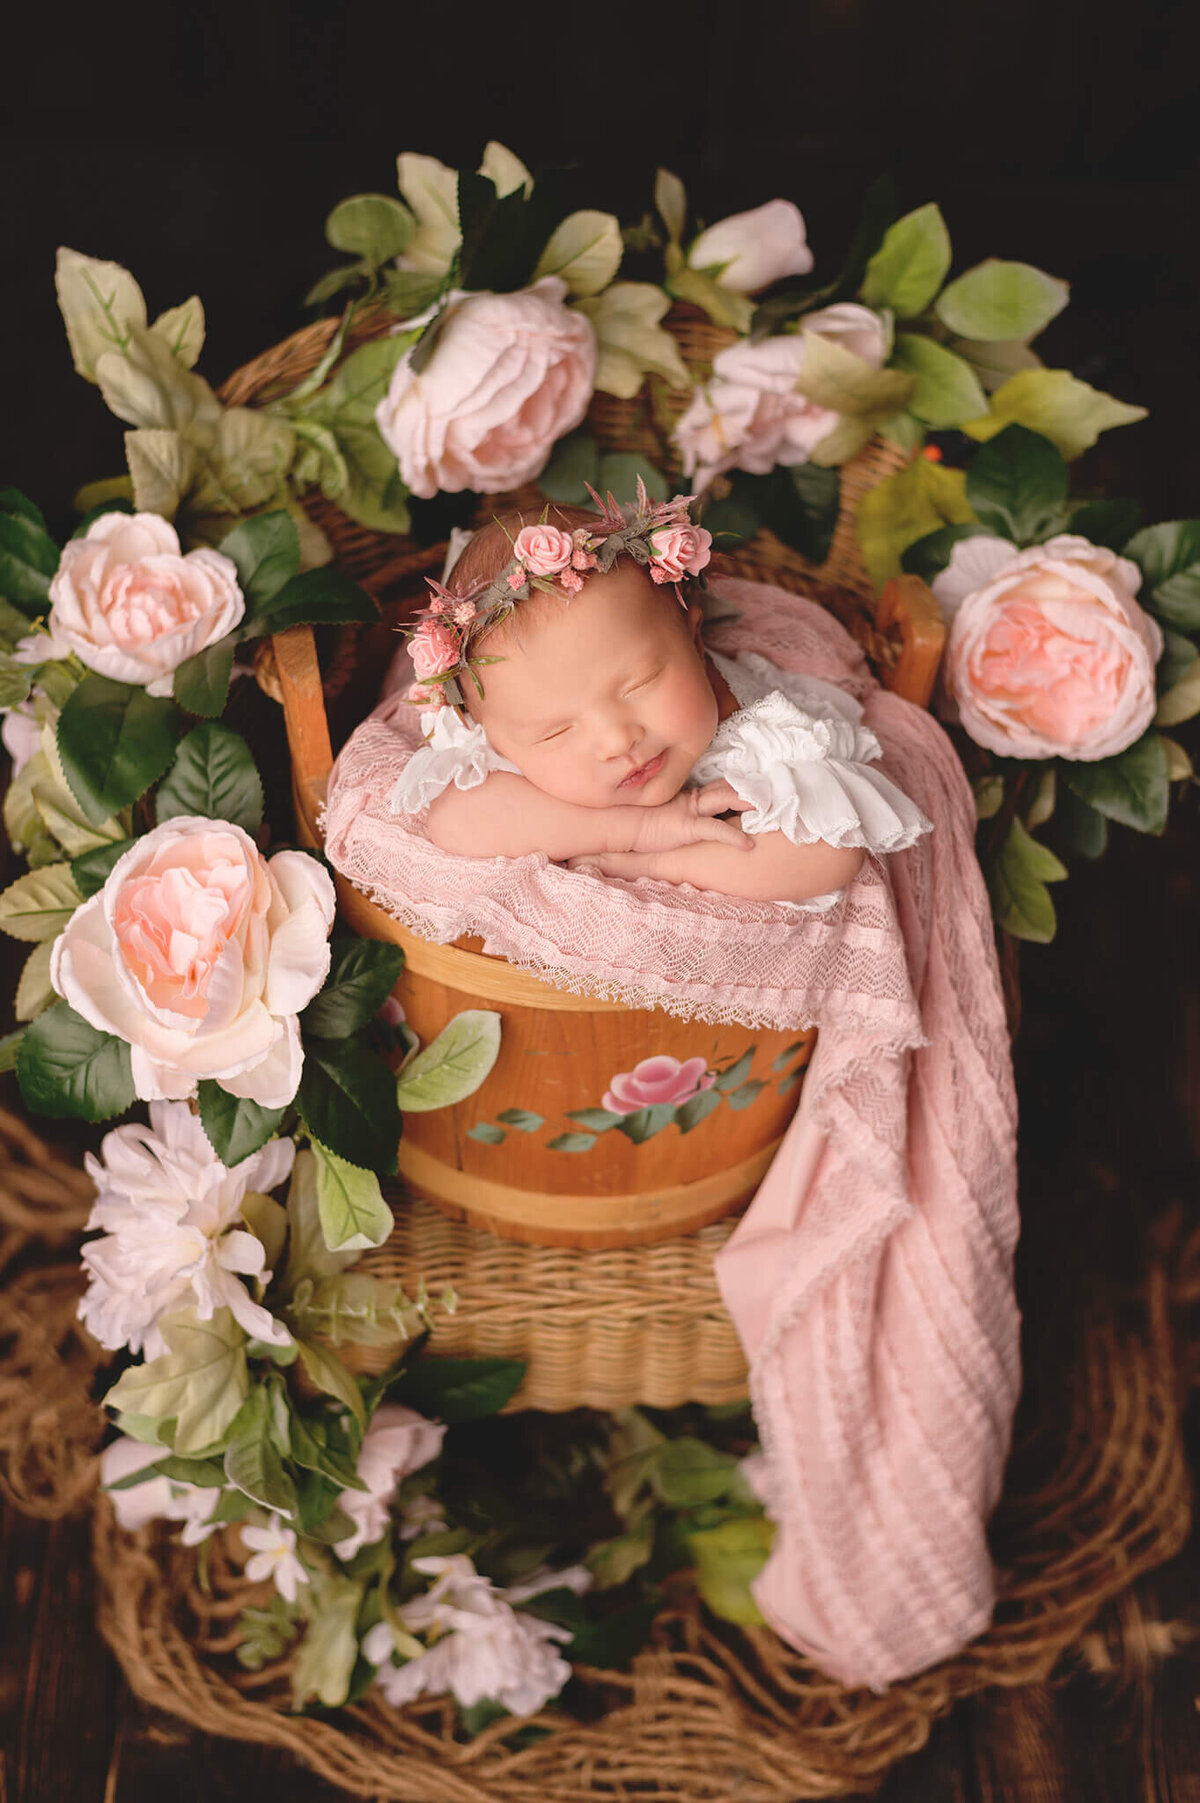 Newborn baby in a floral bucket surrounded by rose vines in a wicker chair at her studio session.